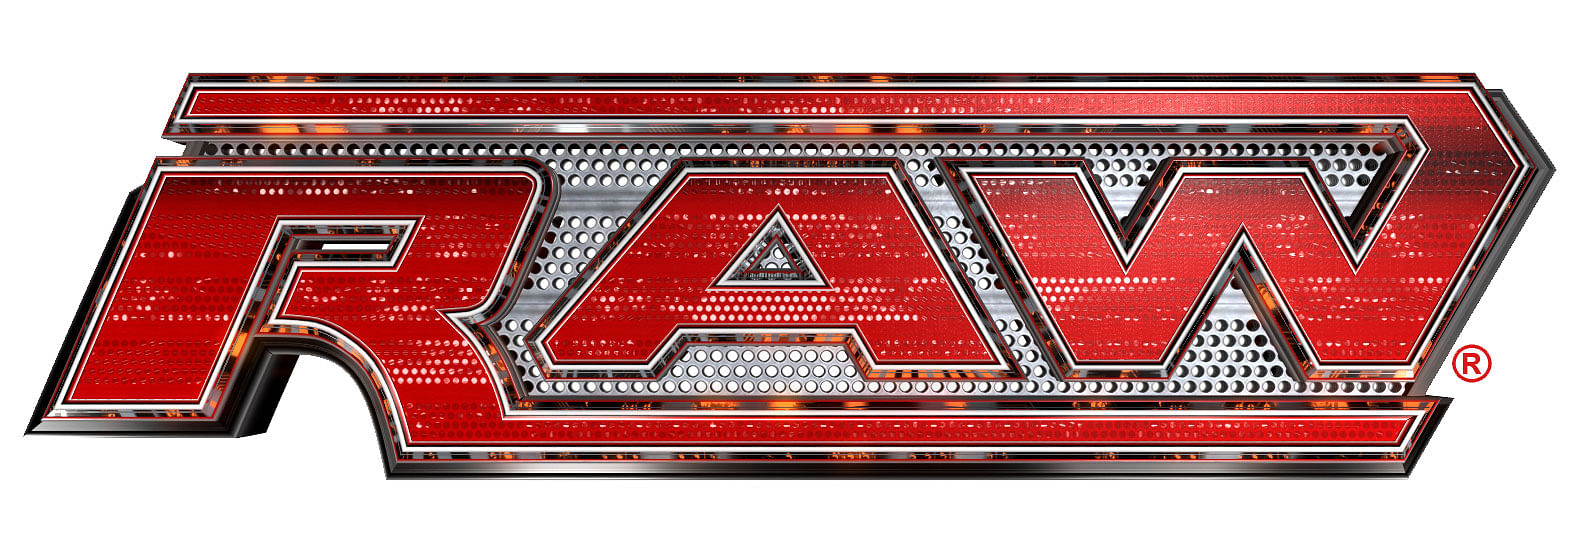 WWE RAW Results: 11th March 2013